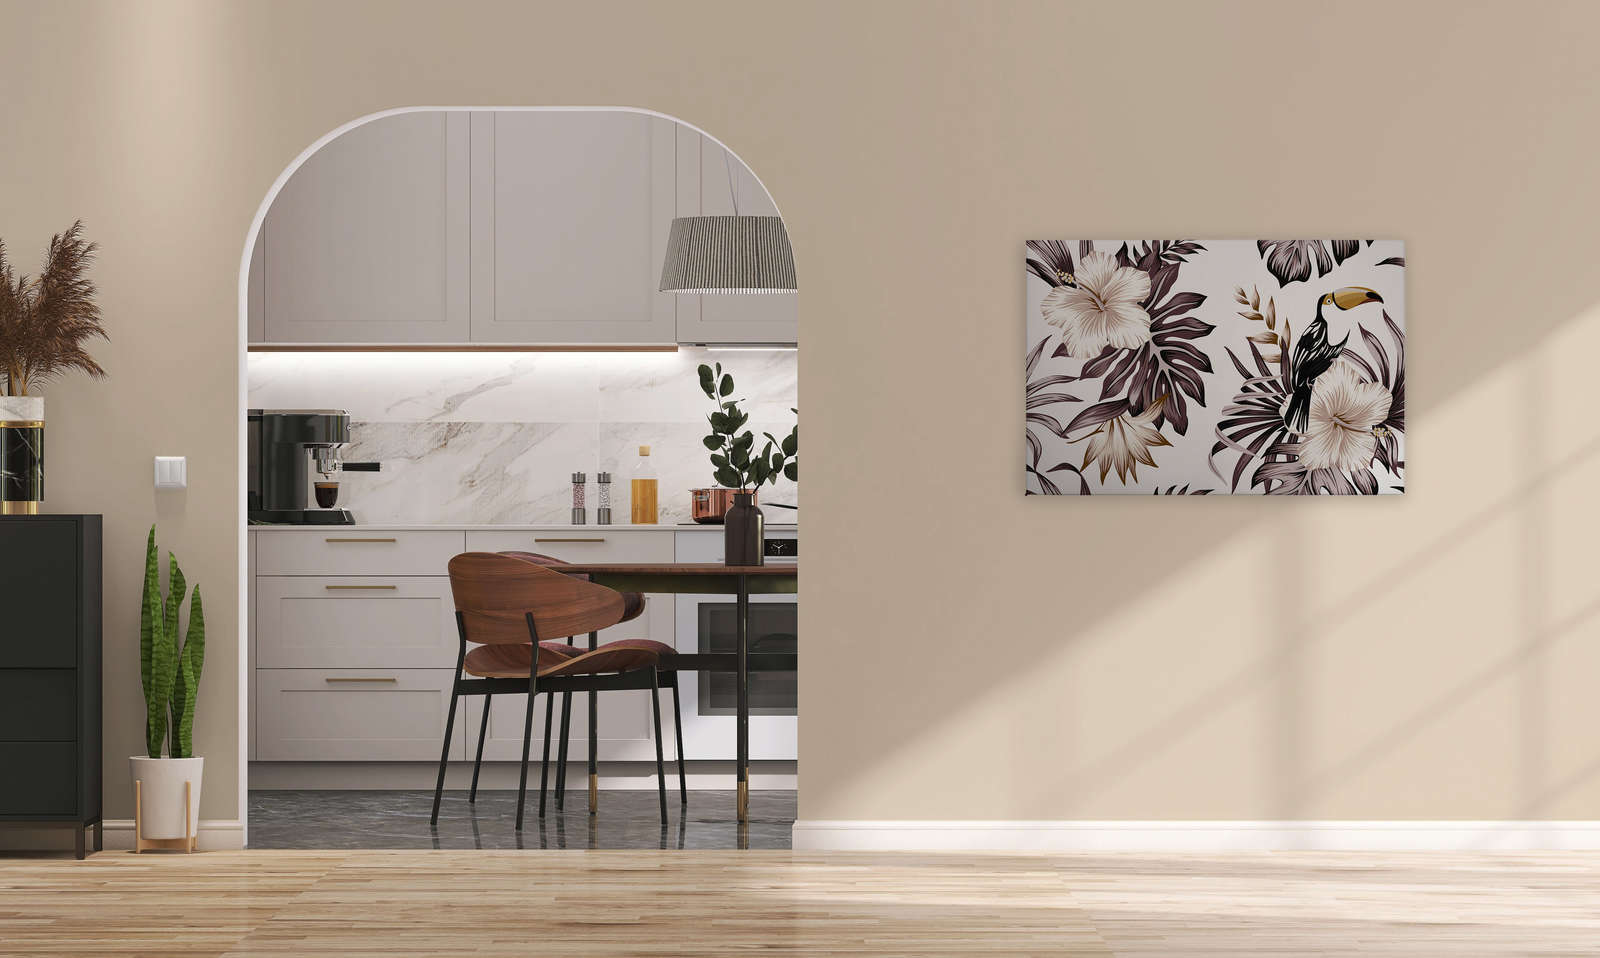             Canvas with jungle plants and pelican | Grey, White, Black - 0.90 m x 0.60 m
        